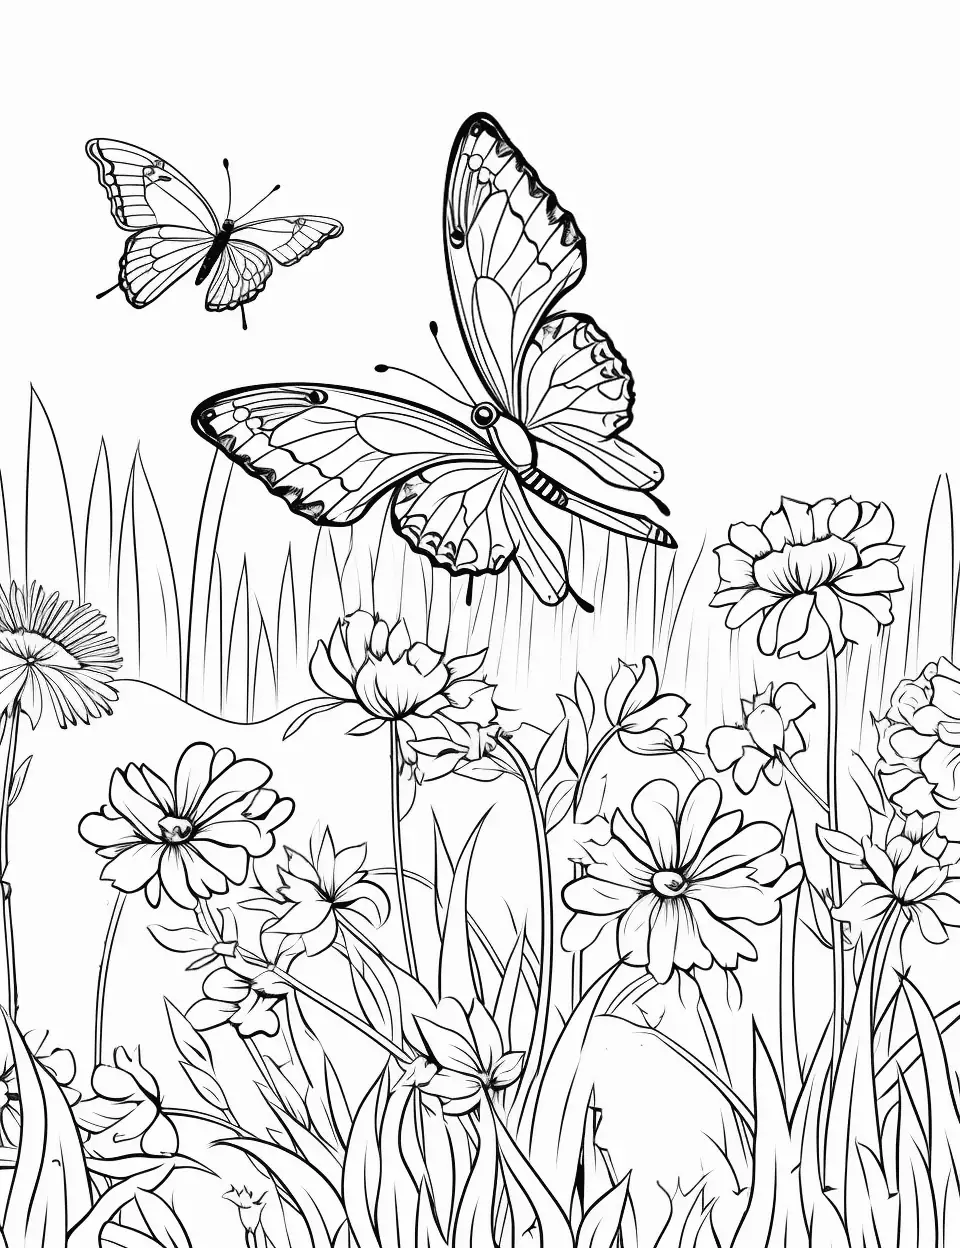 Butterfly Garden on the Farm Coloring Page - A garden with various flowers and butterflies.